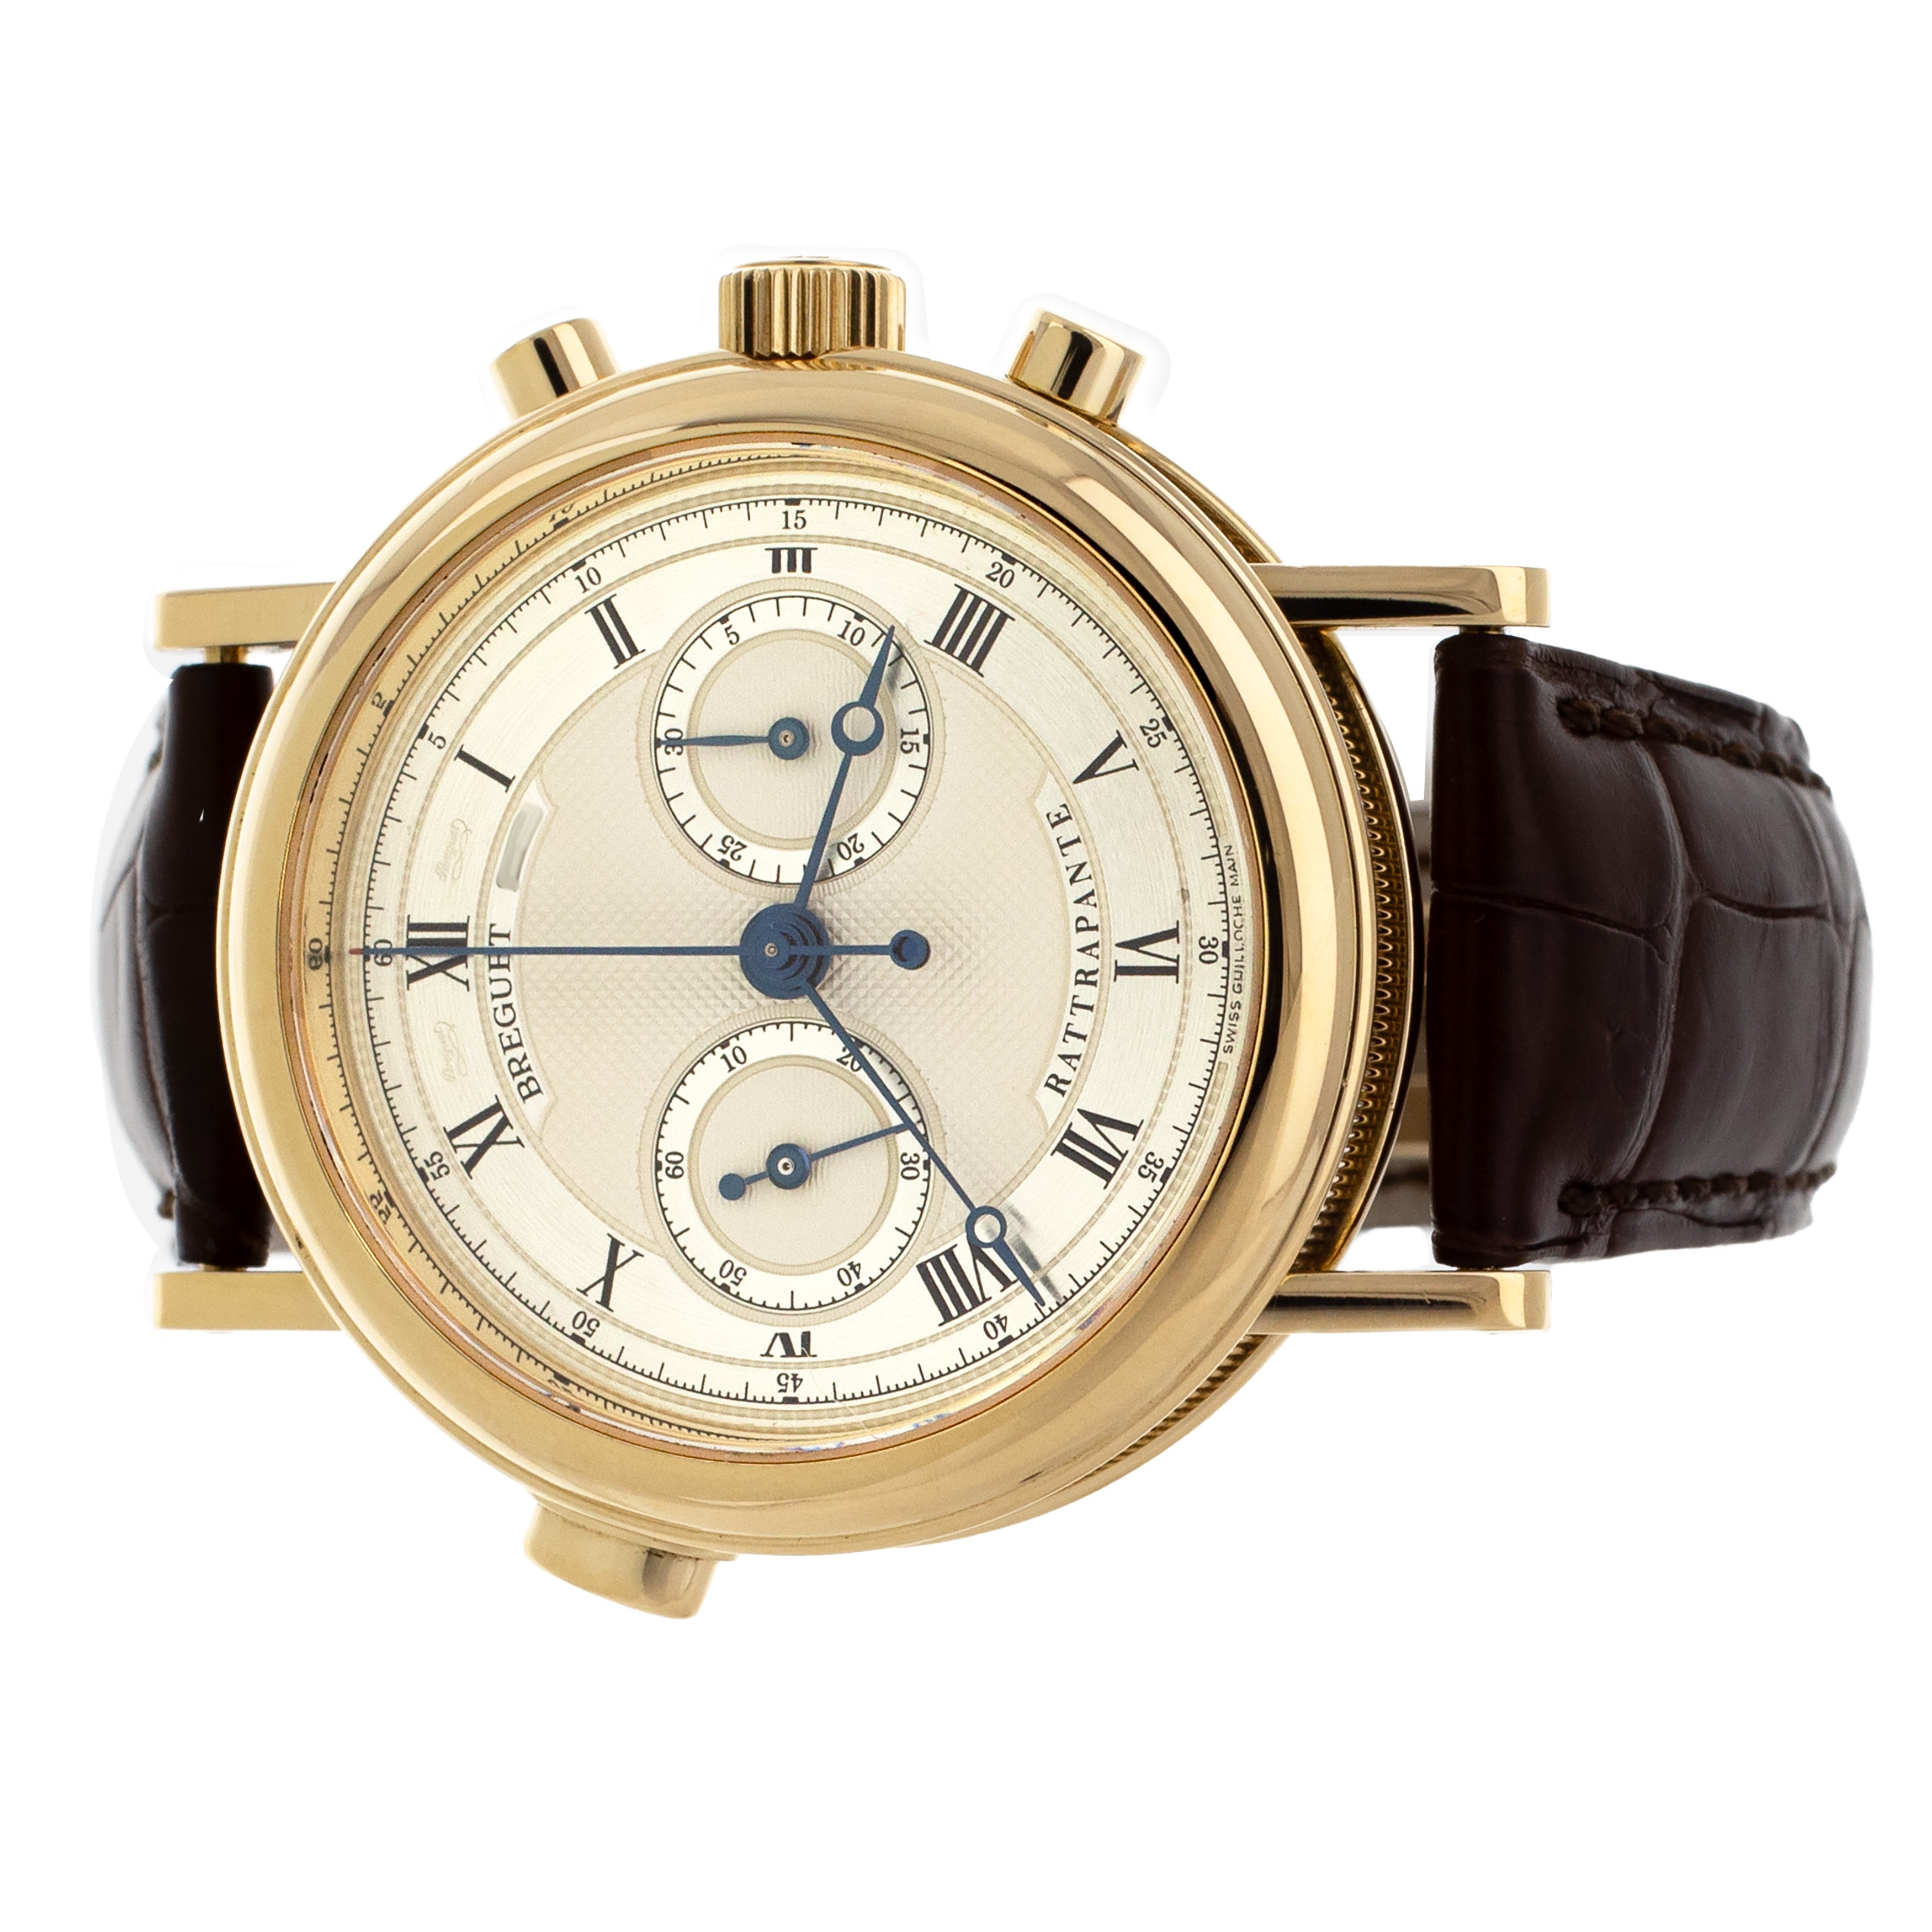 Breguet Classique Rattrapante Yellow Gold White Dial 38mm 3947